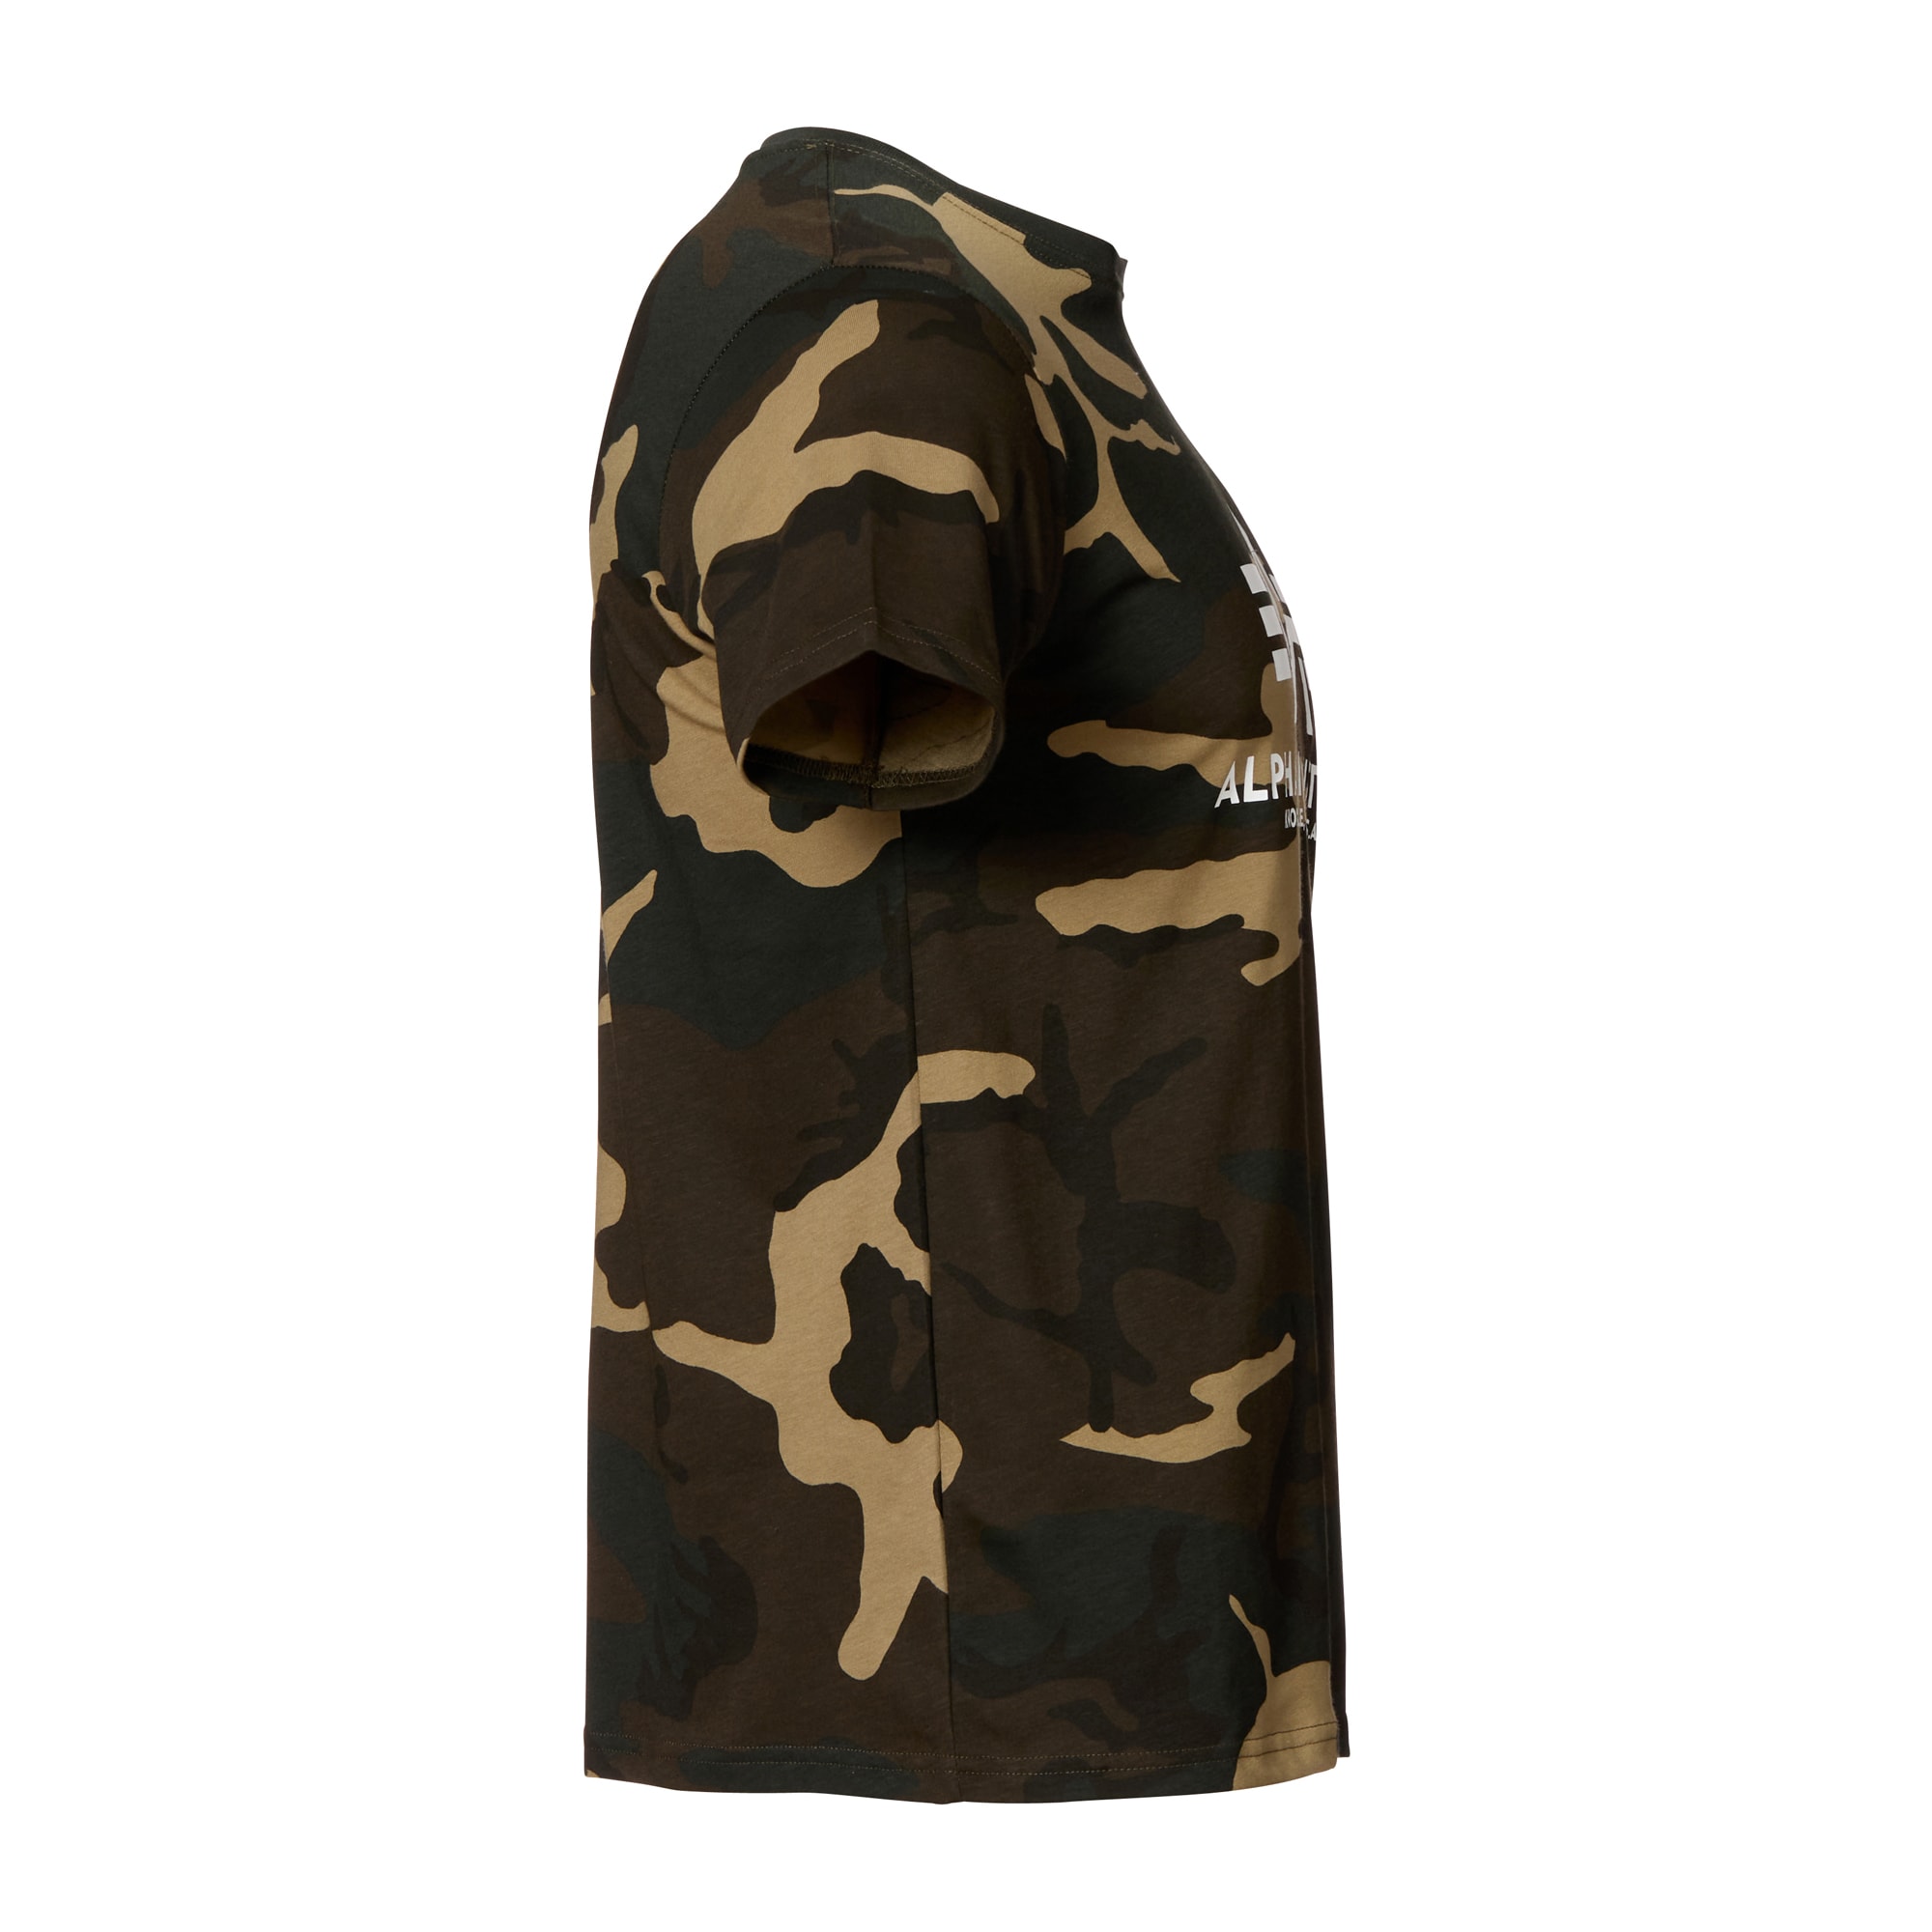 Purchase the T-Shirt Basic by camo Alpha 65 Industries woodland